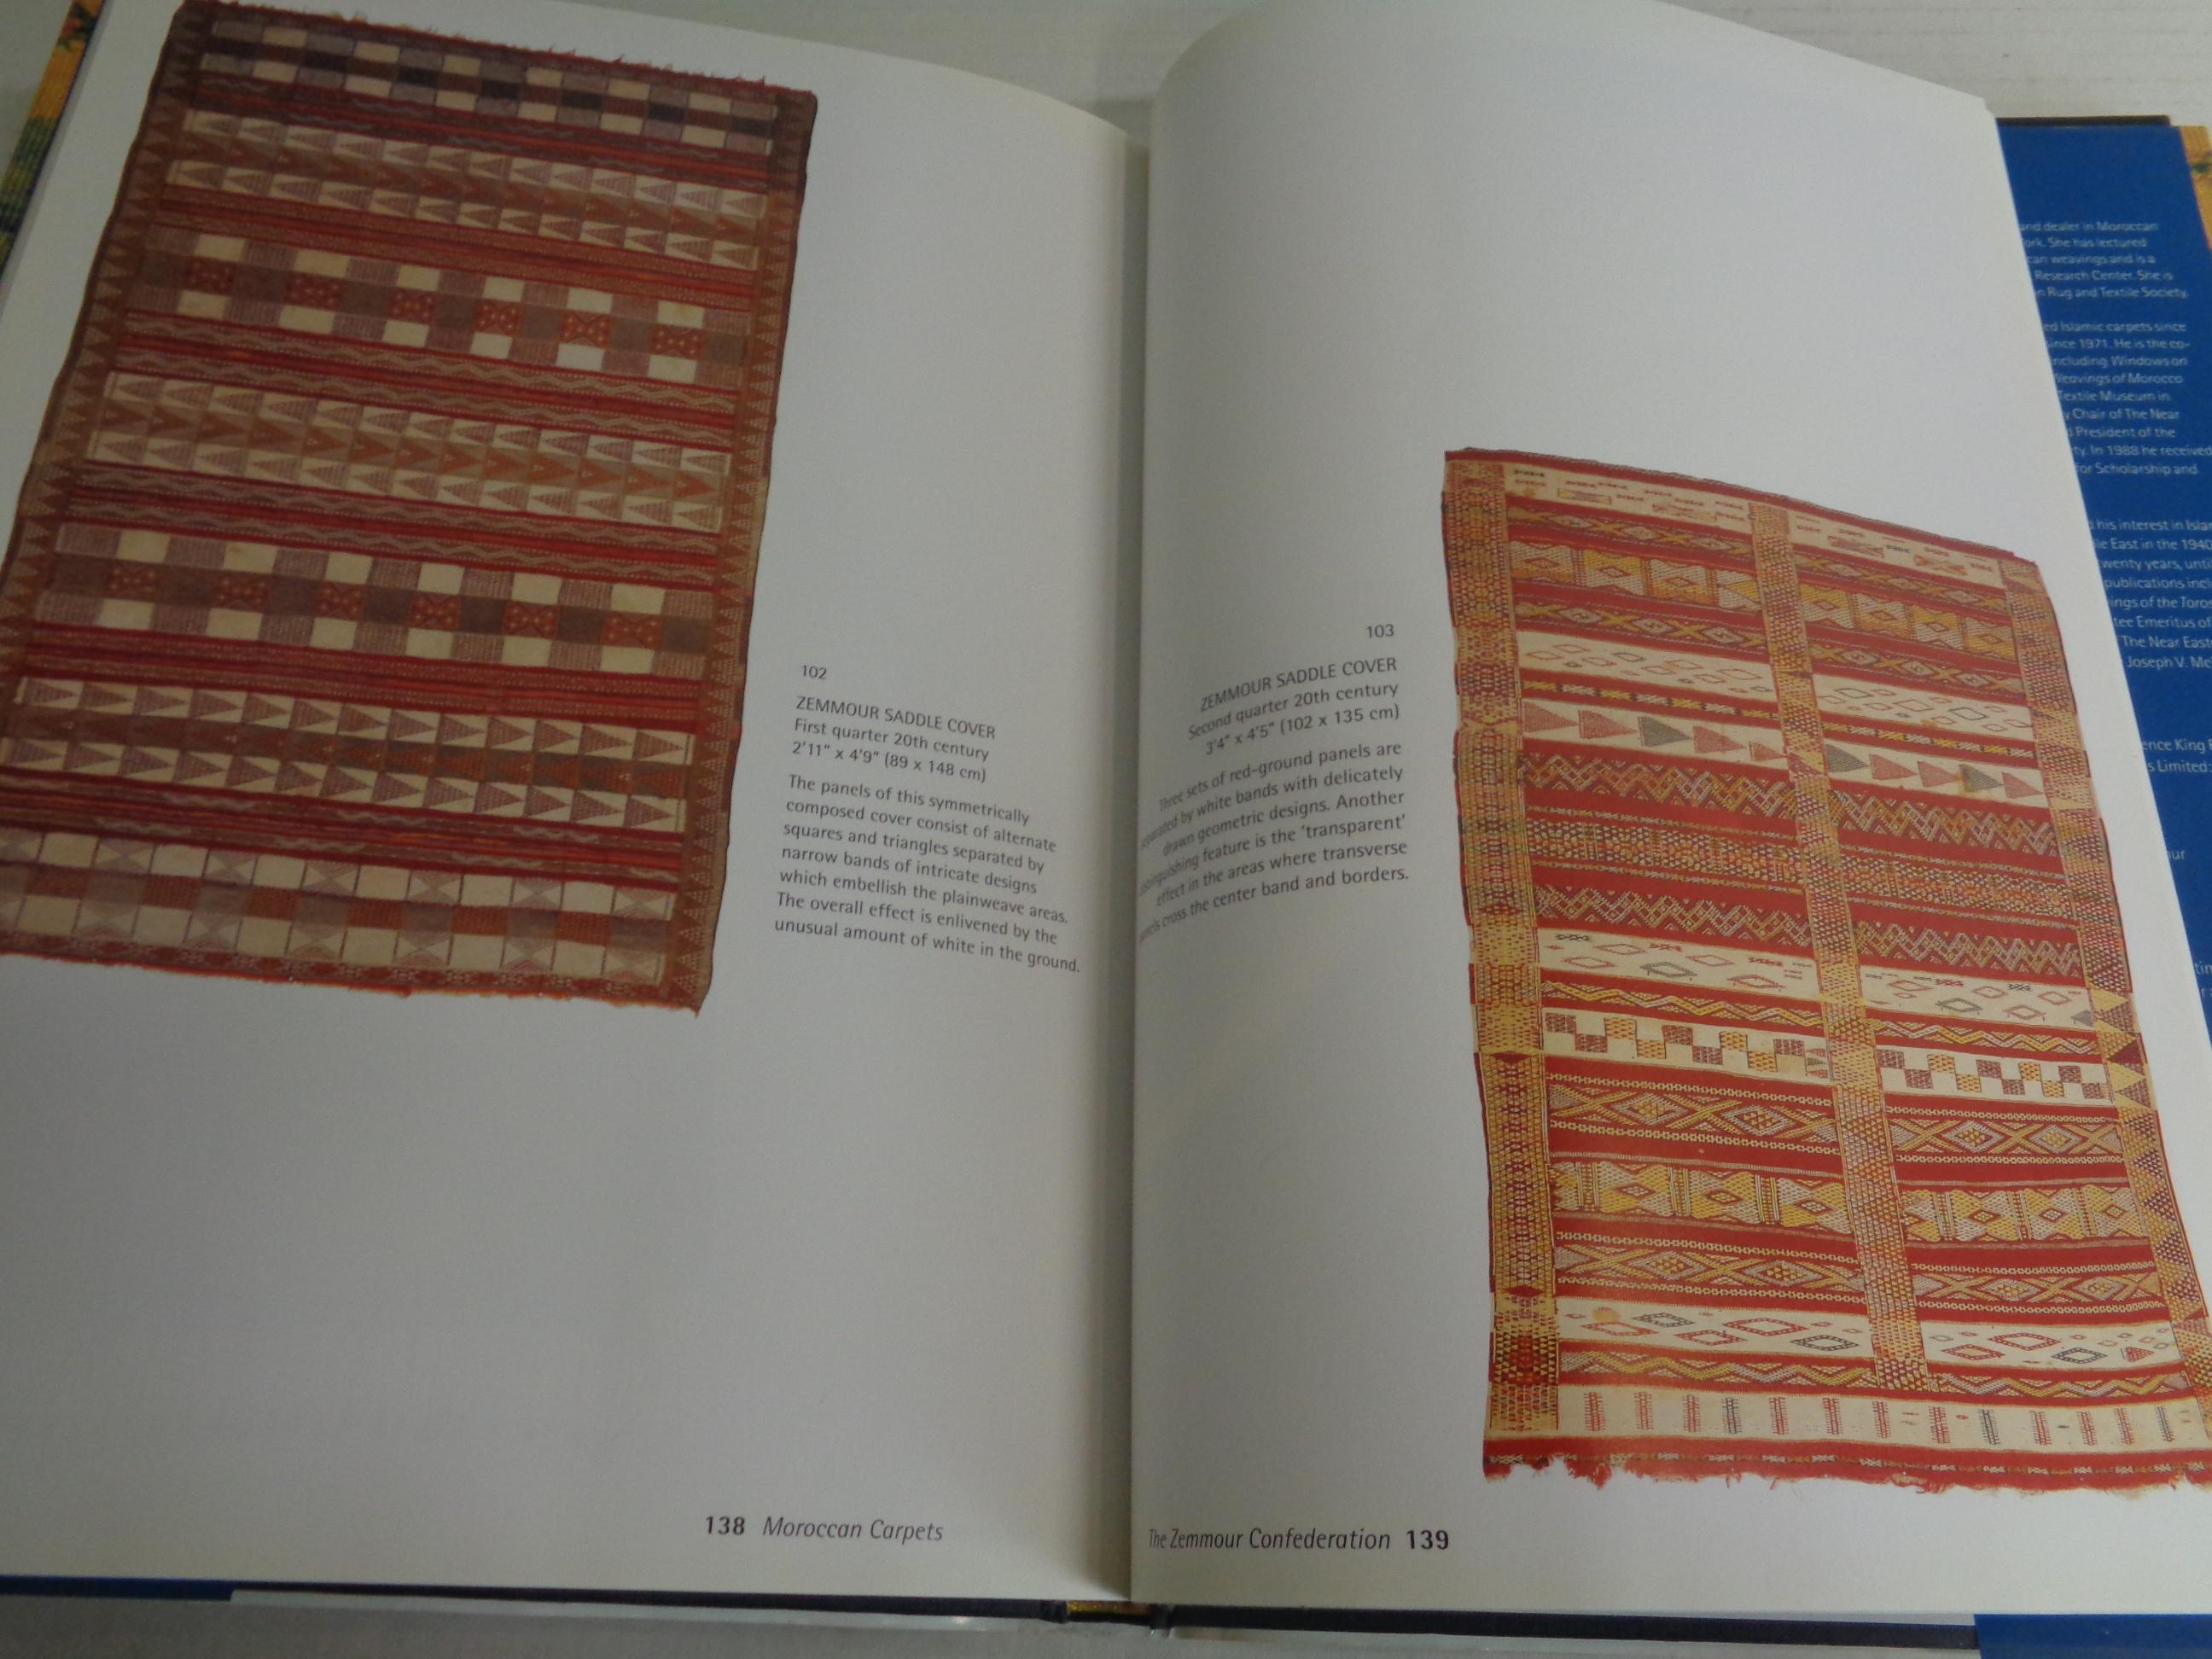  Moroccan Carpets: Pickering, Pickering, Yohe - Laurence King Hali Publications For Sale 7